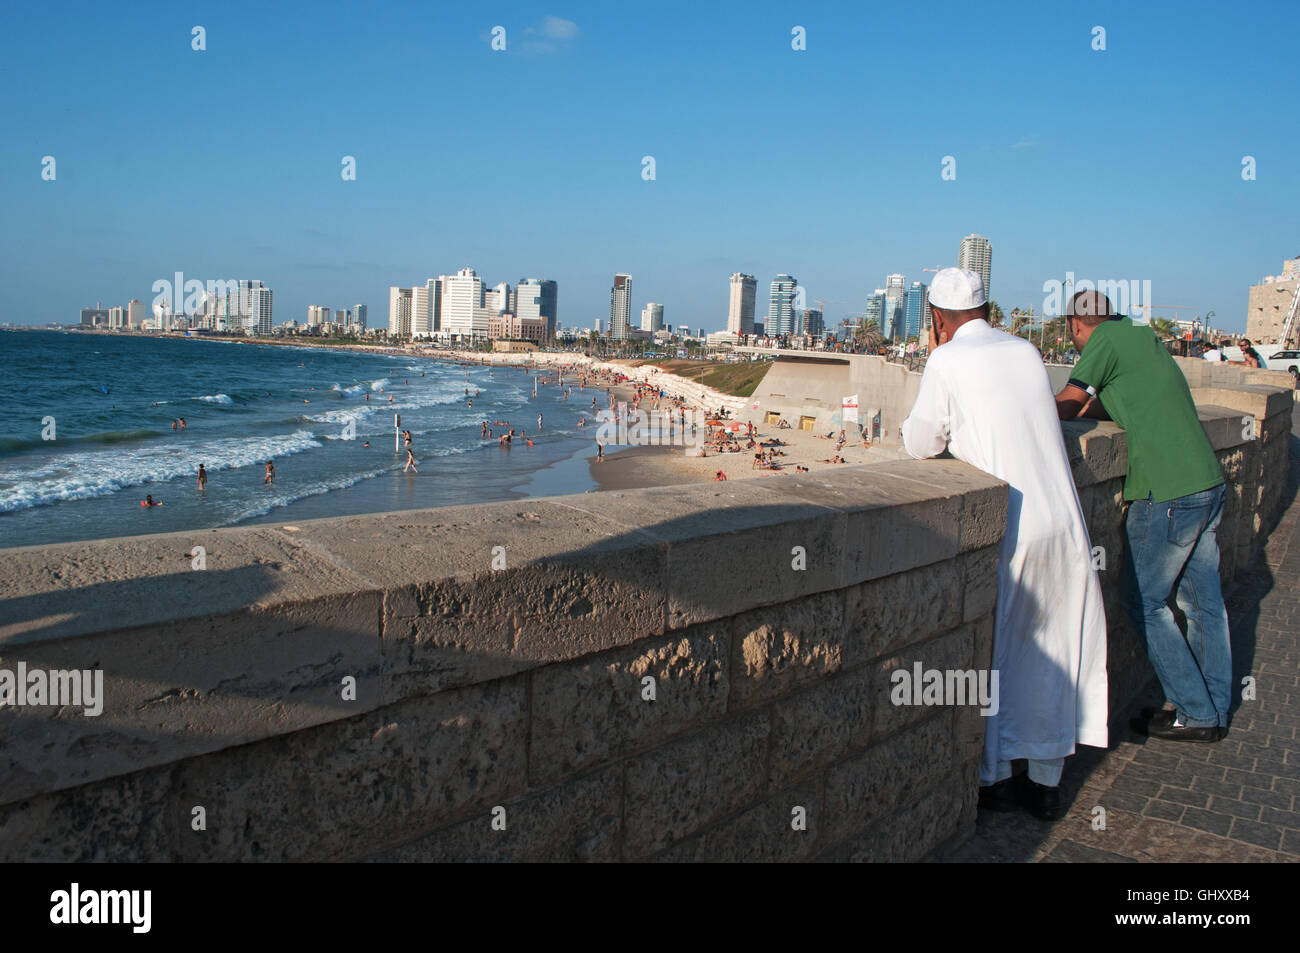 Israel, middle East: muslim men at the promenade of Old Jaffa with view of the Mediterranean Sea and the skyline of Tel Aviv on the background Stock Photo